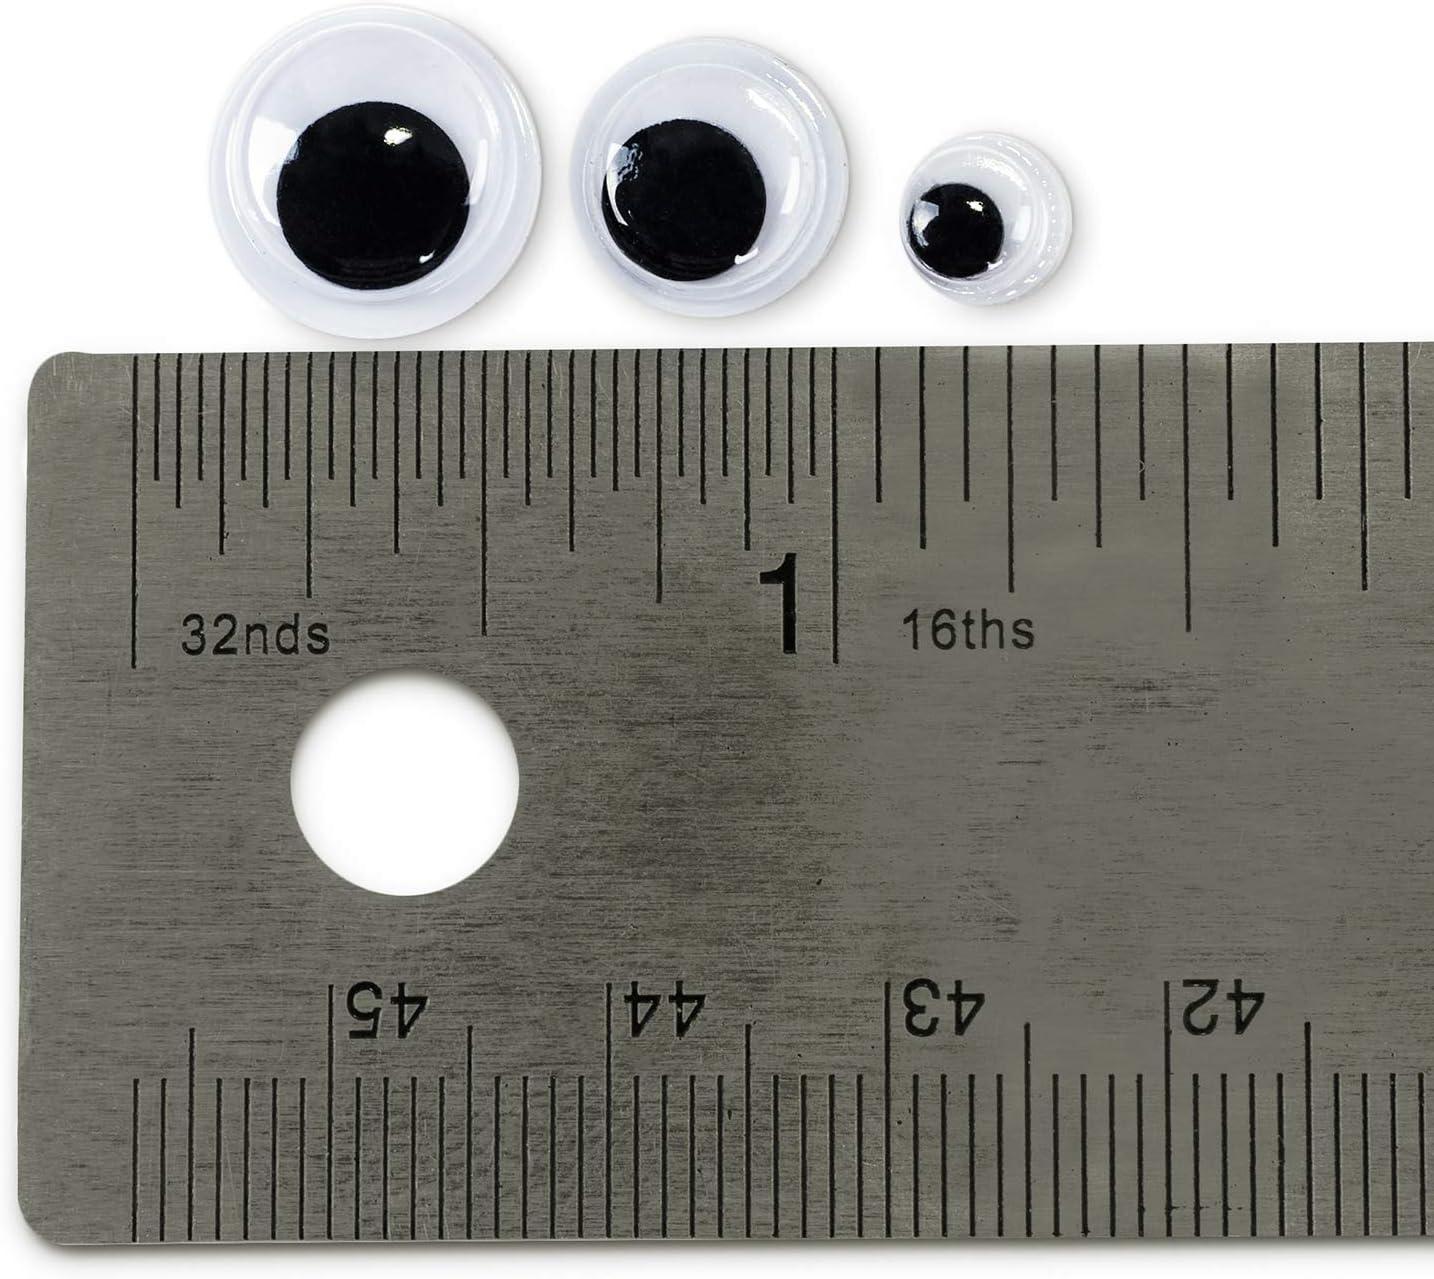 Mini Black Plastic Eyes And Noses Assorted Sizes Small Ball - Temu